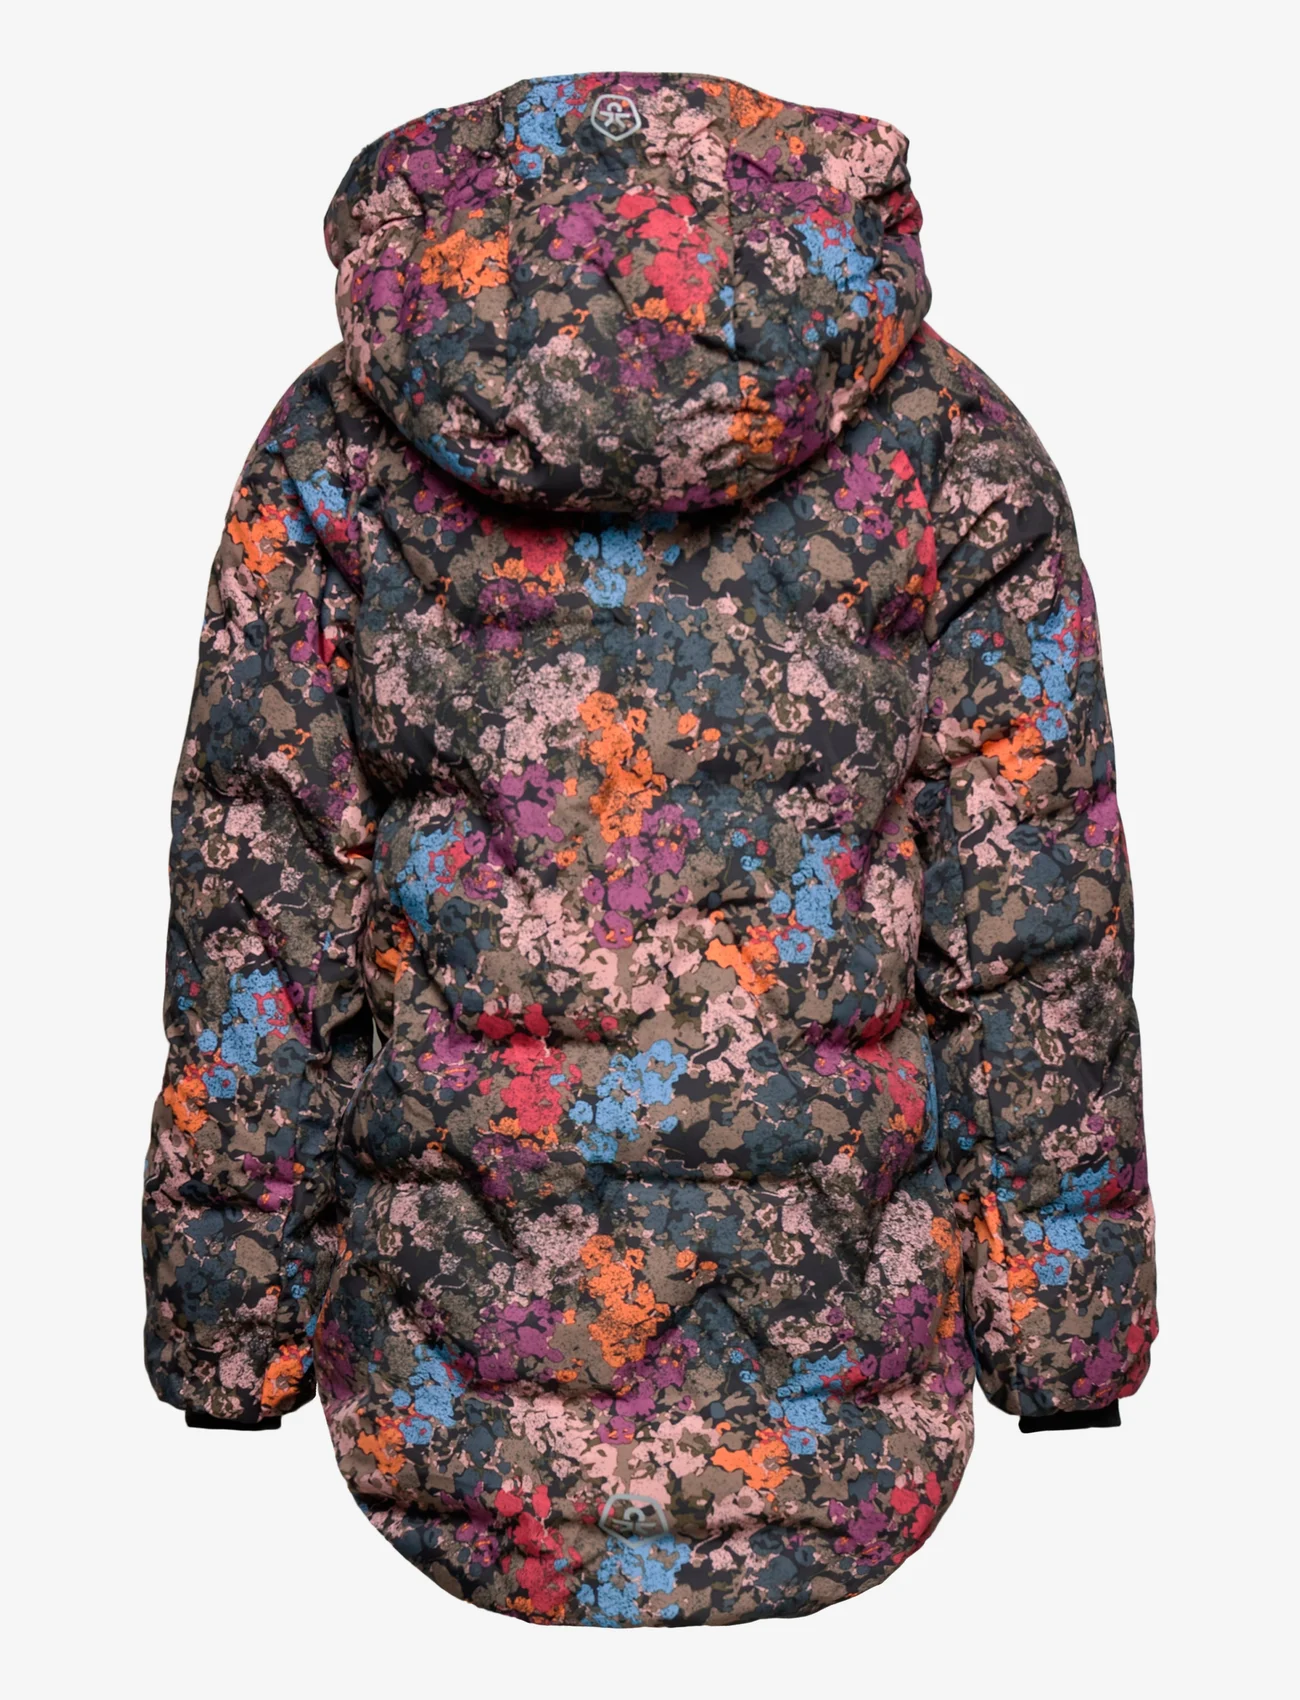 Color Kids - Jacket - Quilted - AOP - untuva- & toppatakit - misty rose - 1